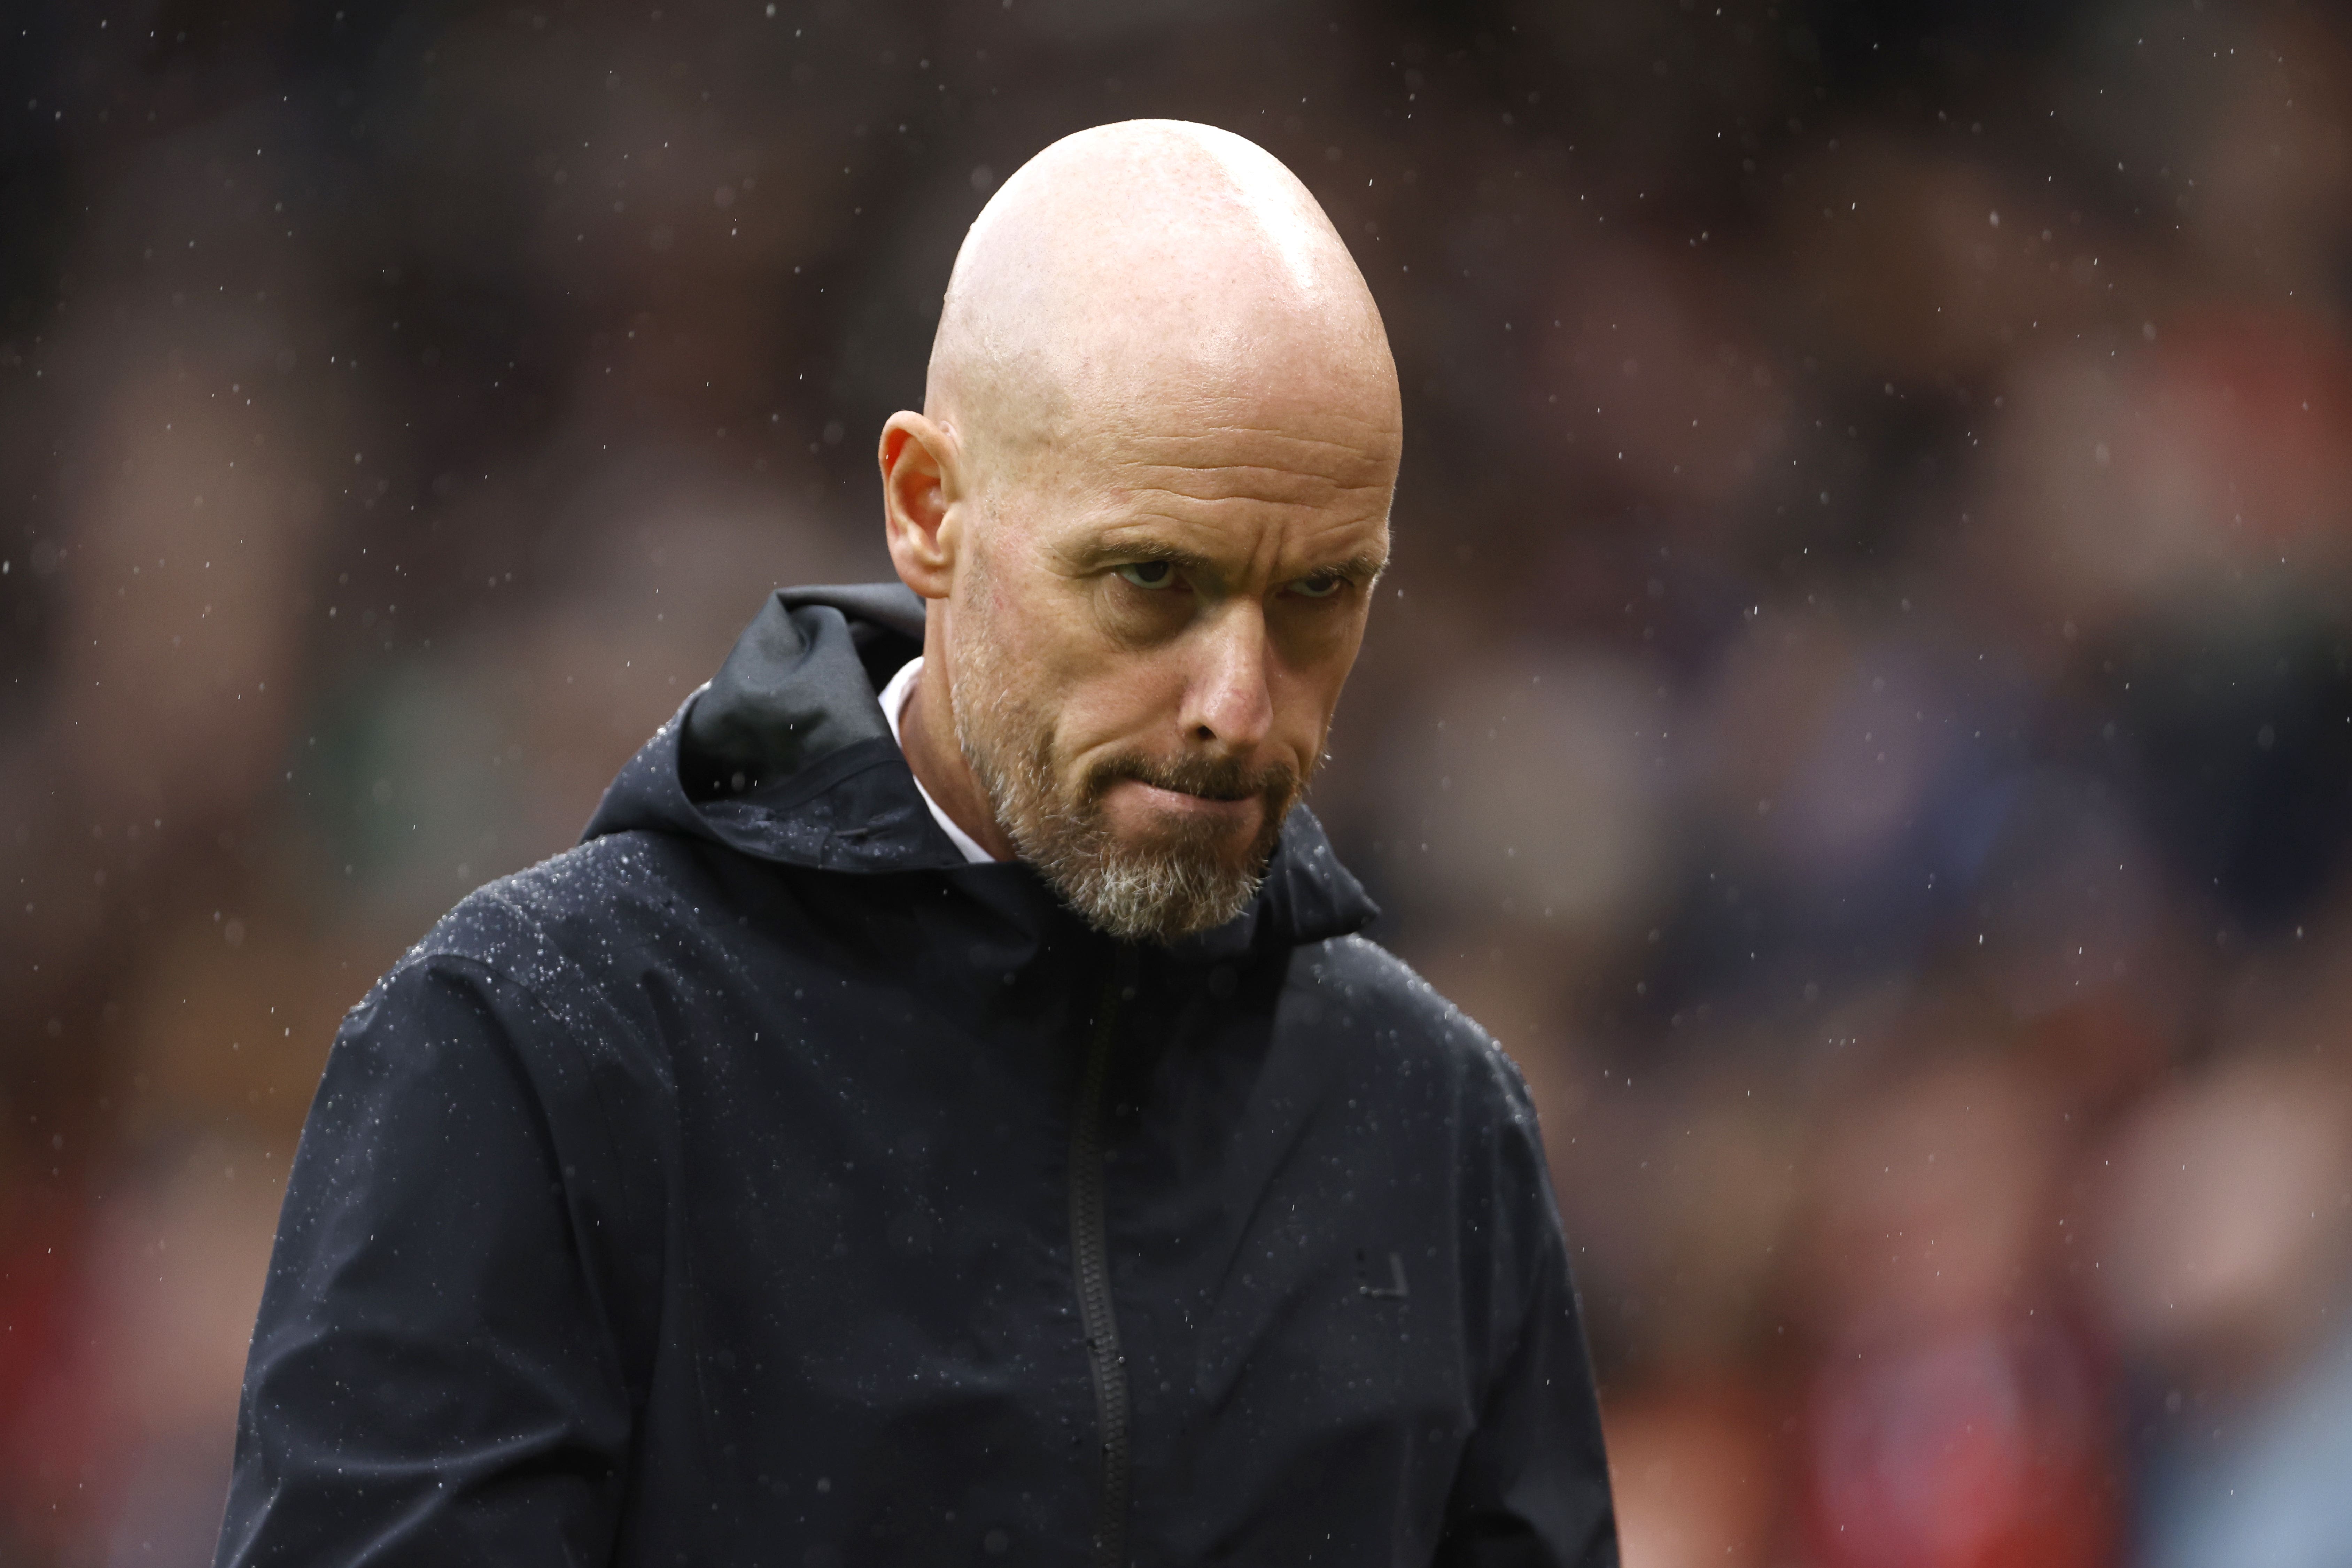  Erik ten Hag looking determined on the sidelines during a match.